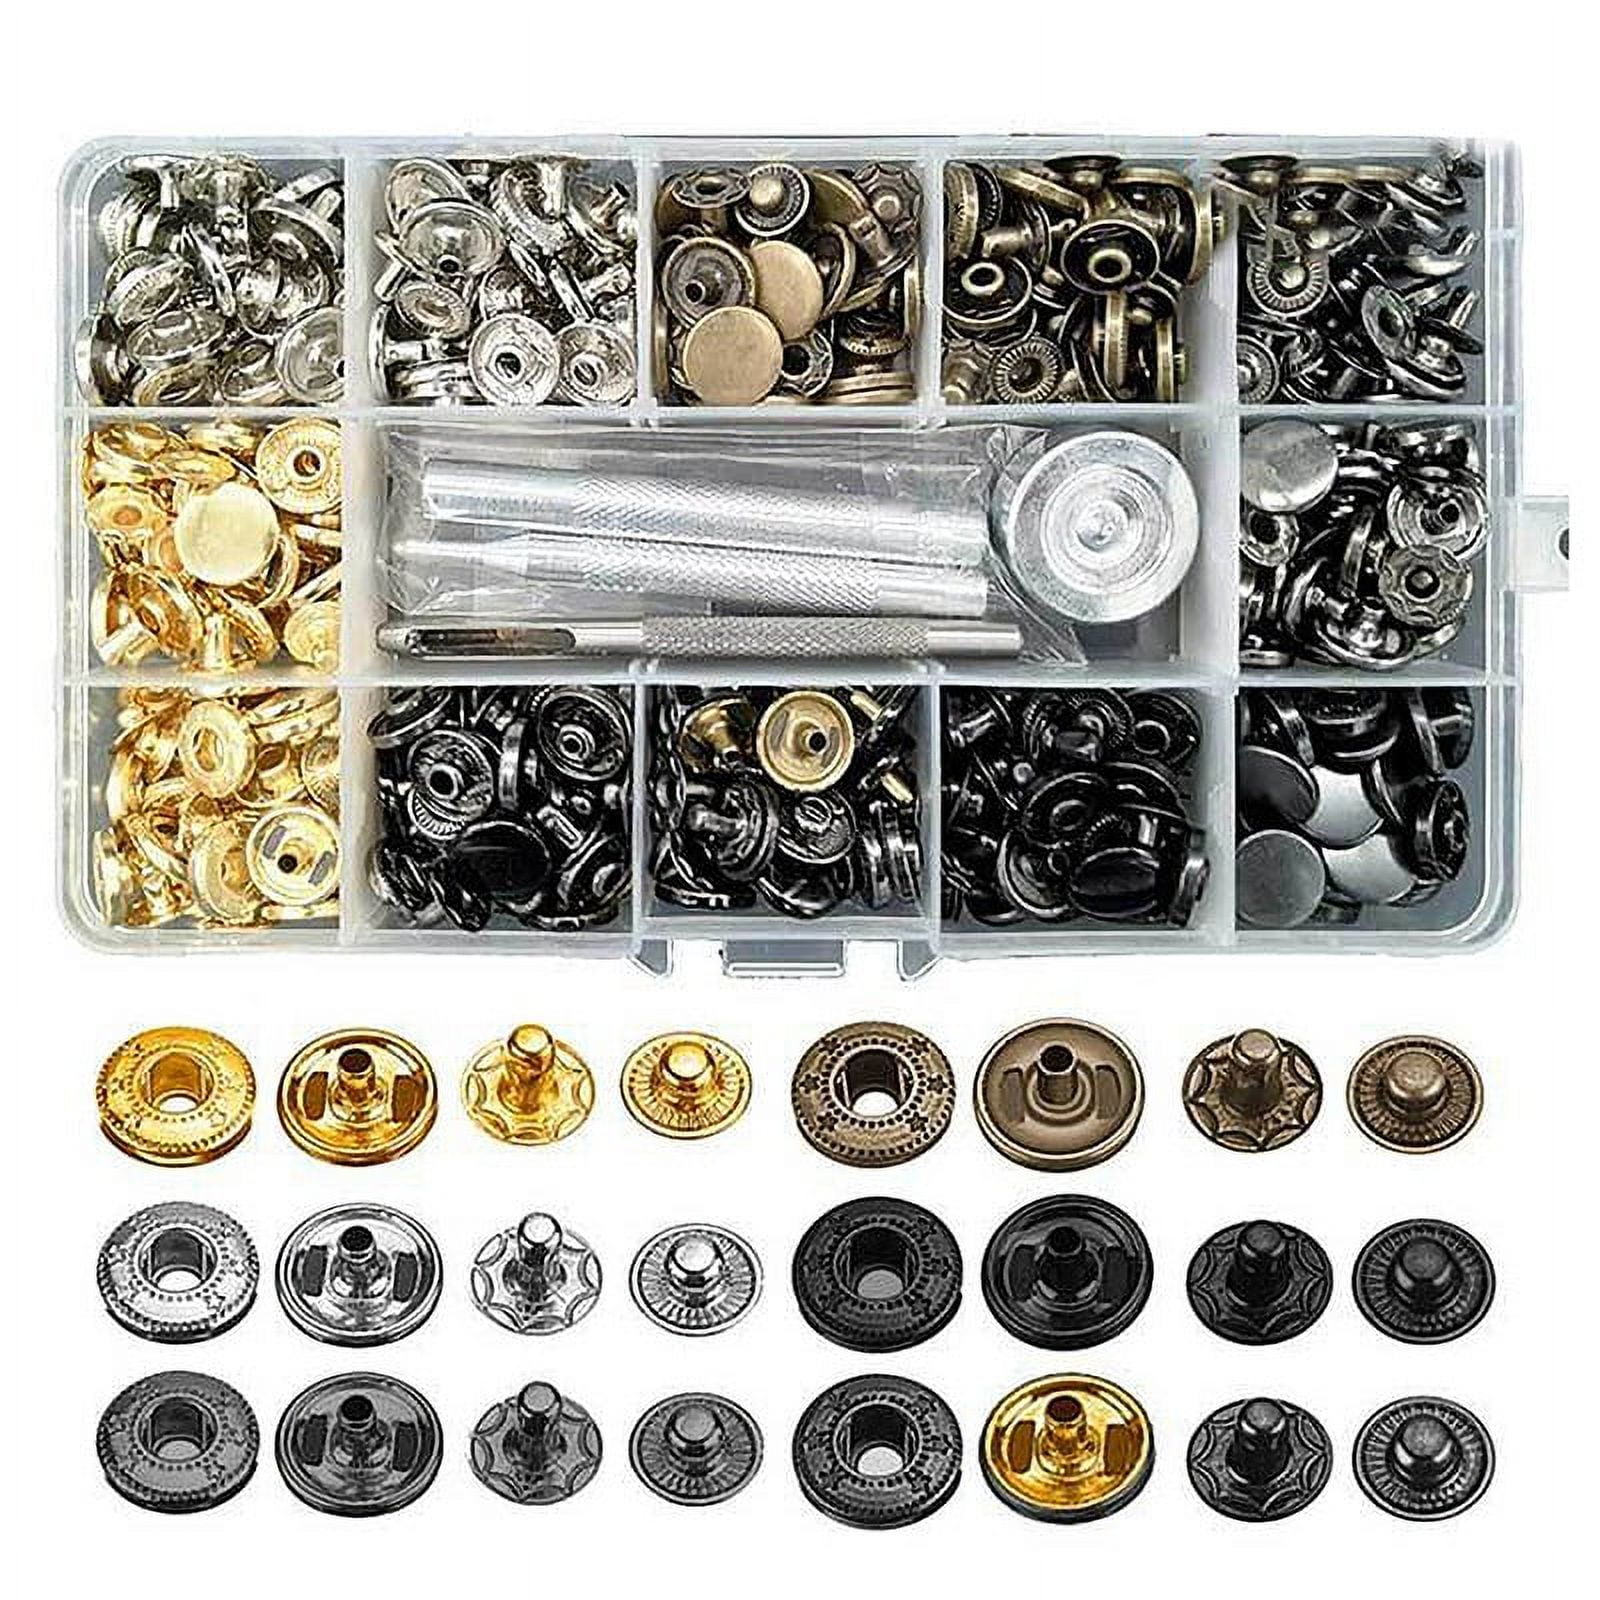 280 Sets Sew-on Snap Buttons Metal Snaps Fasteners Press Studs Buttons for  Sewing, Black and